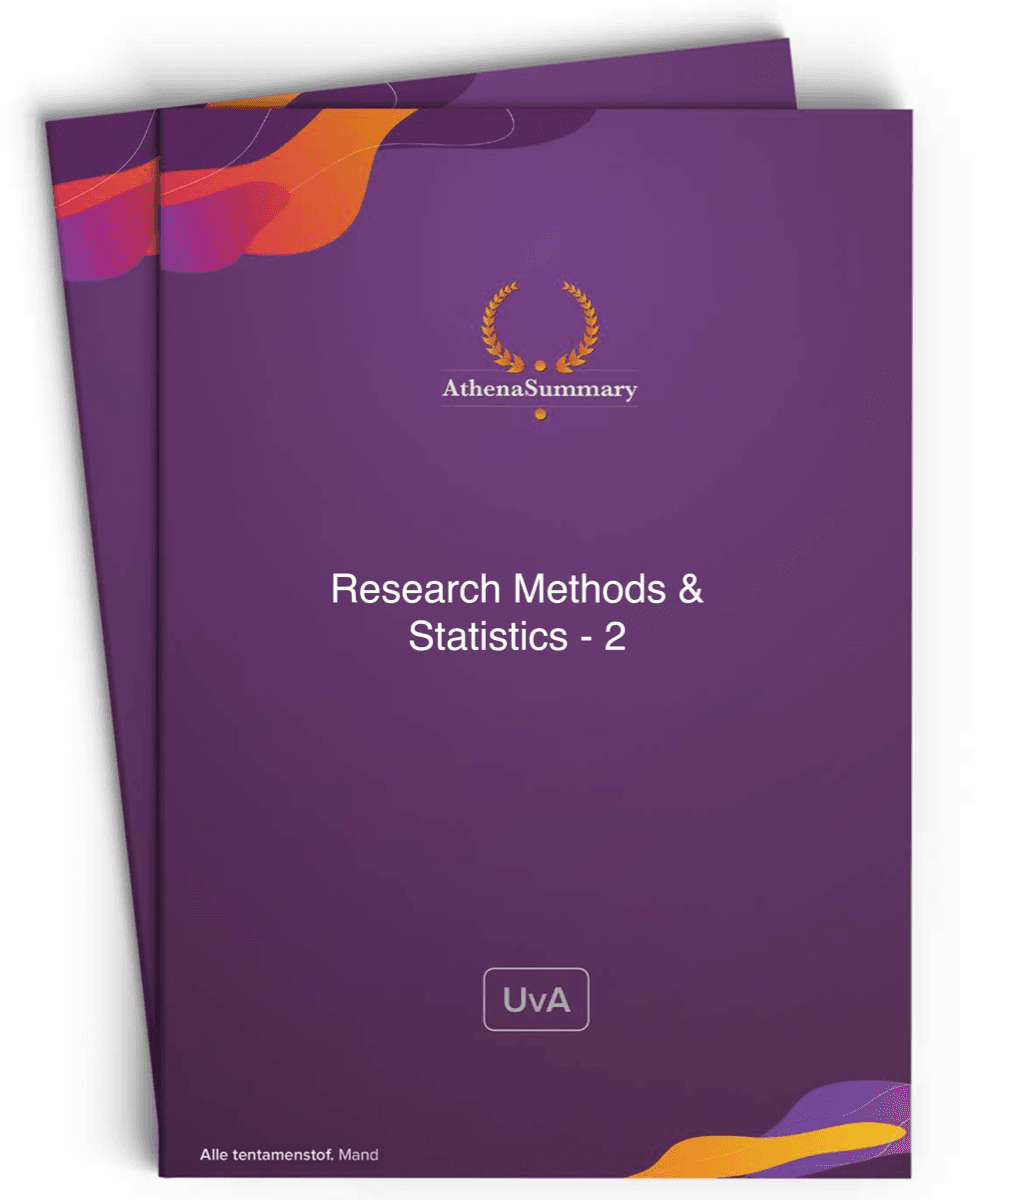 Literature Summary: Research Methods and Statistics - 2